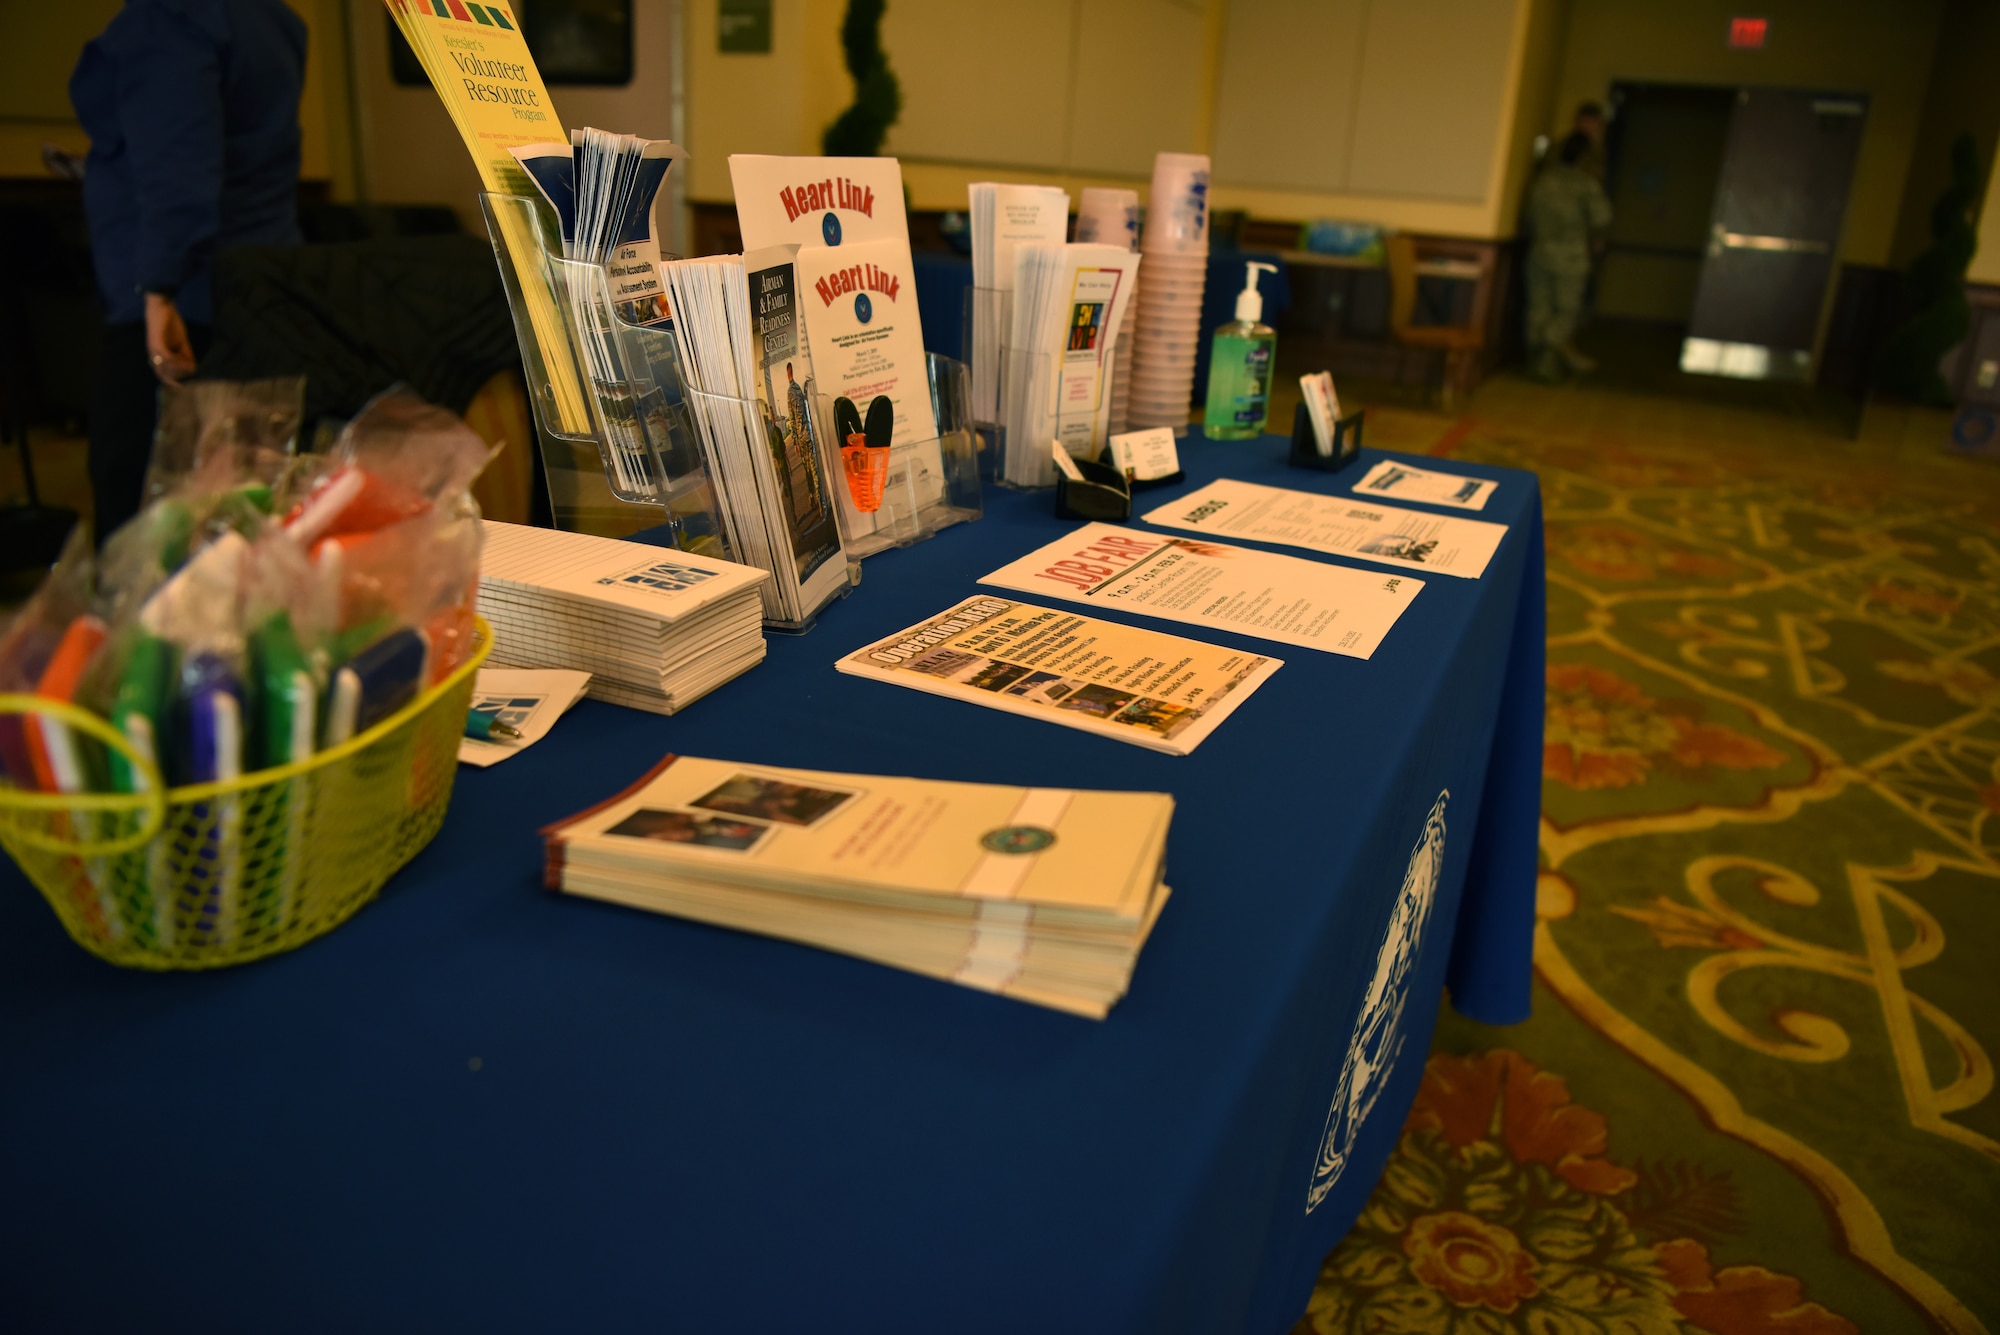 Airman and Family Readiness Center pamphlets are displayed on a booth during the Keesler Housing Review Open House inside the Bay Breeze Event Center at Keesler Air Force Base, Mississippi, Feb. 25, 2019. The open house gave military members and their families a chance to voice their housing concerns to leadership. (U.S. Air Force photo by Airman 1st Class Suzie Plotnikov)